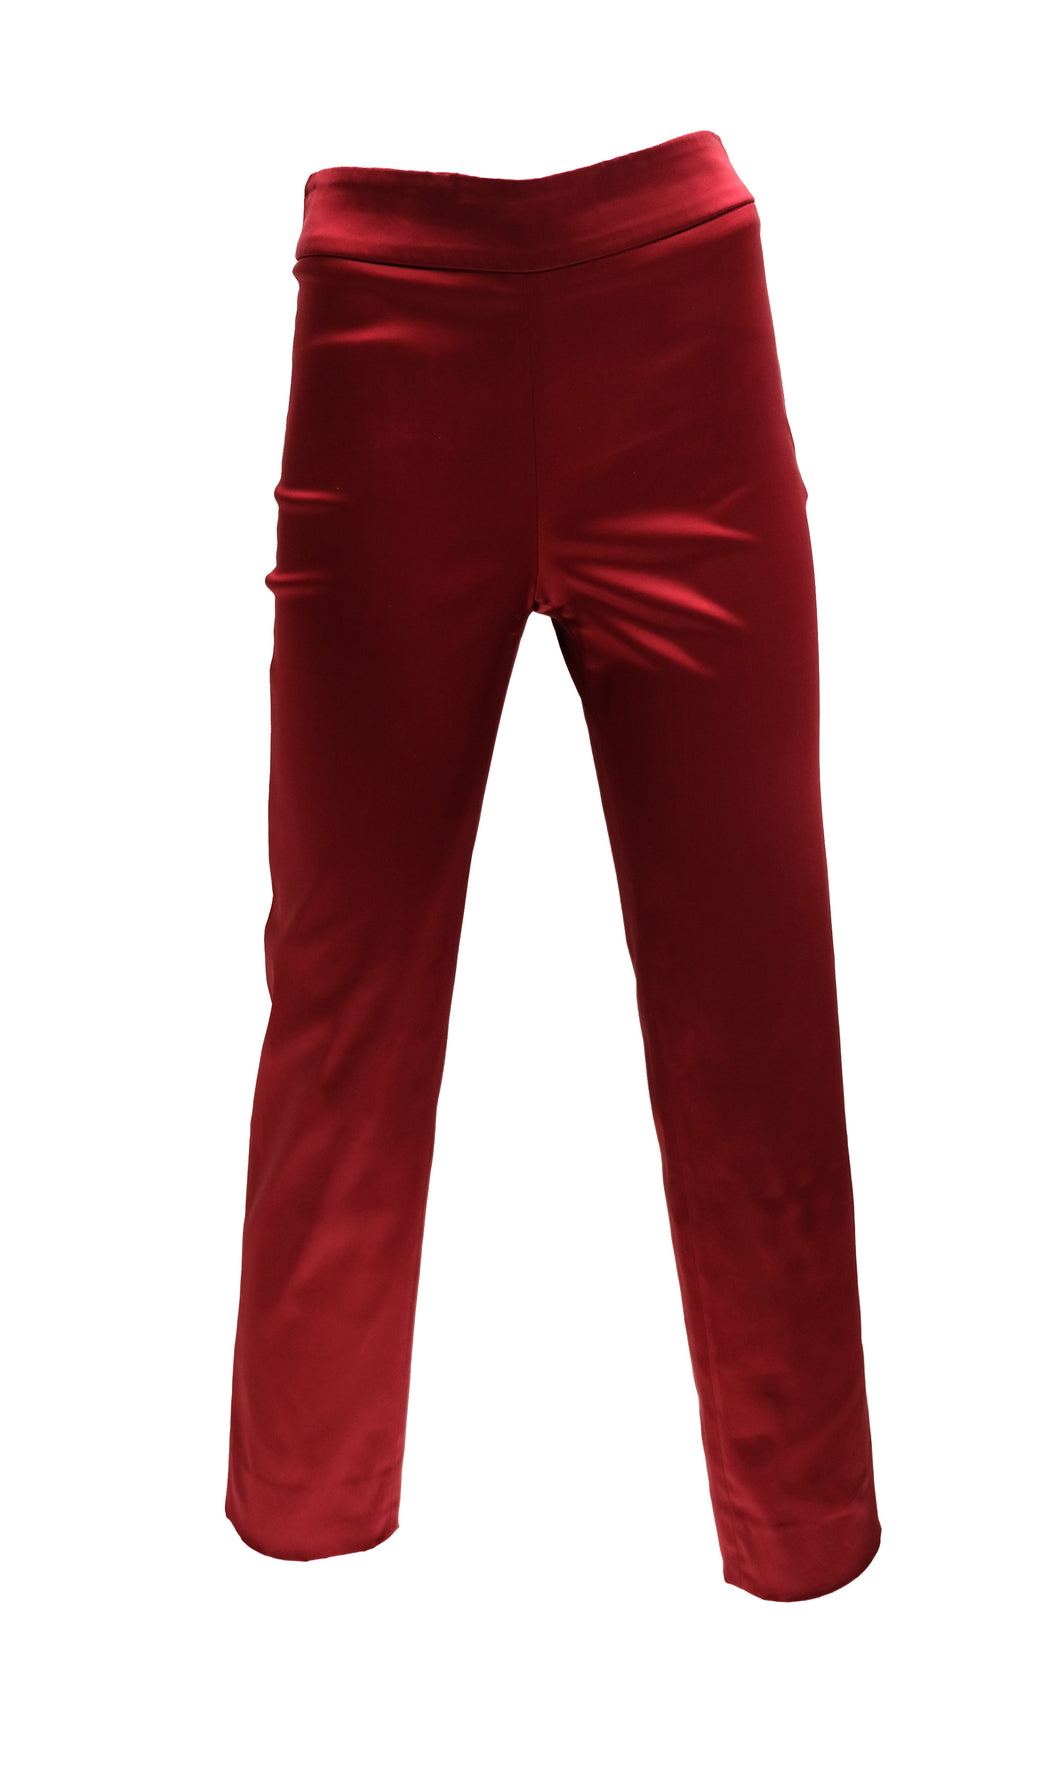 Dolce & Gabbana Vintage Trousers in Ruby Red Satin, UK6-8